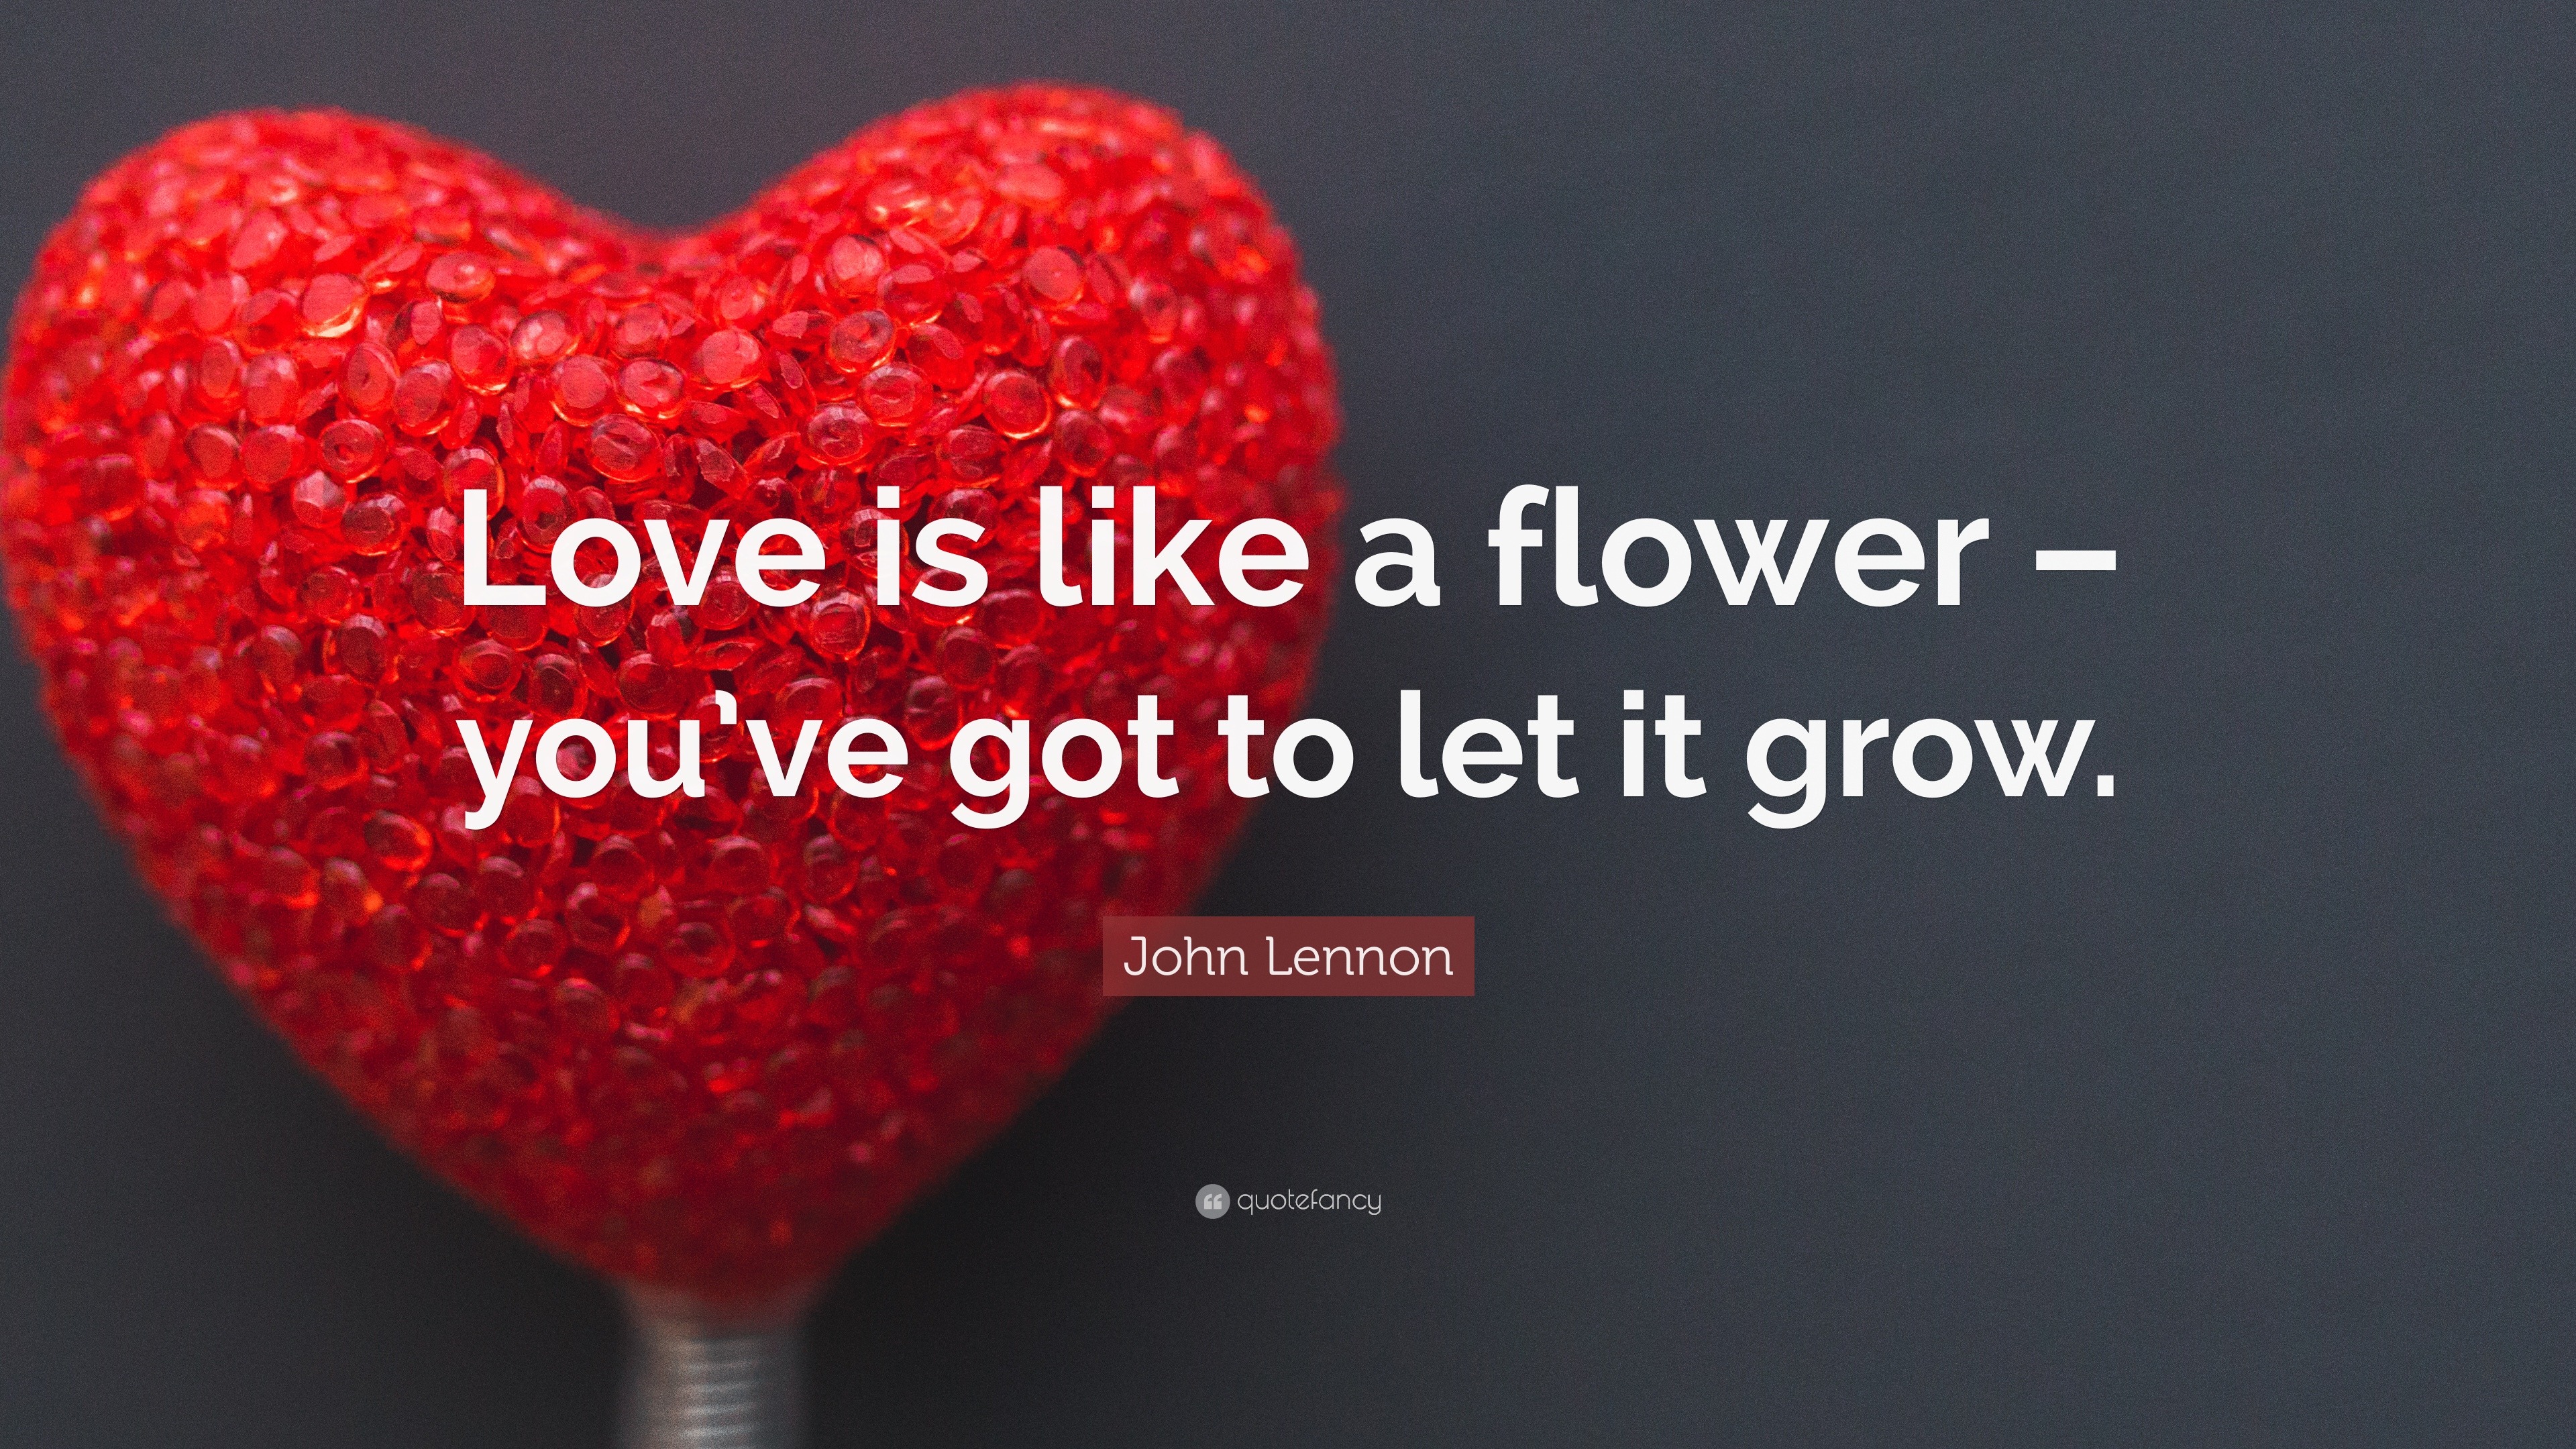 John Lennon Quote   Love  is like a flower  you ve got to 